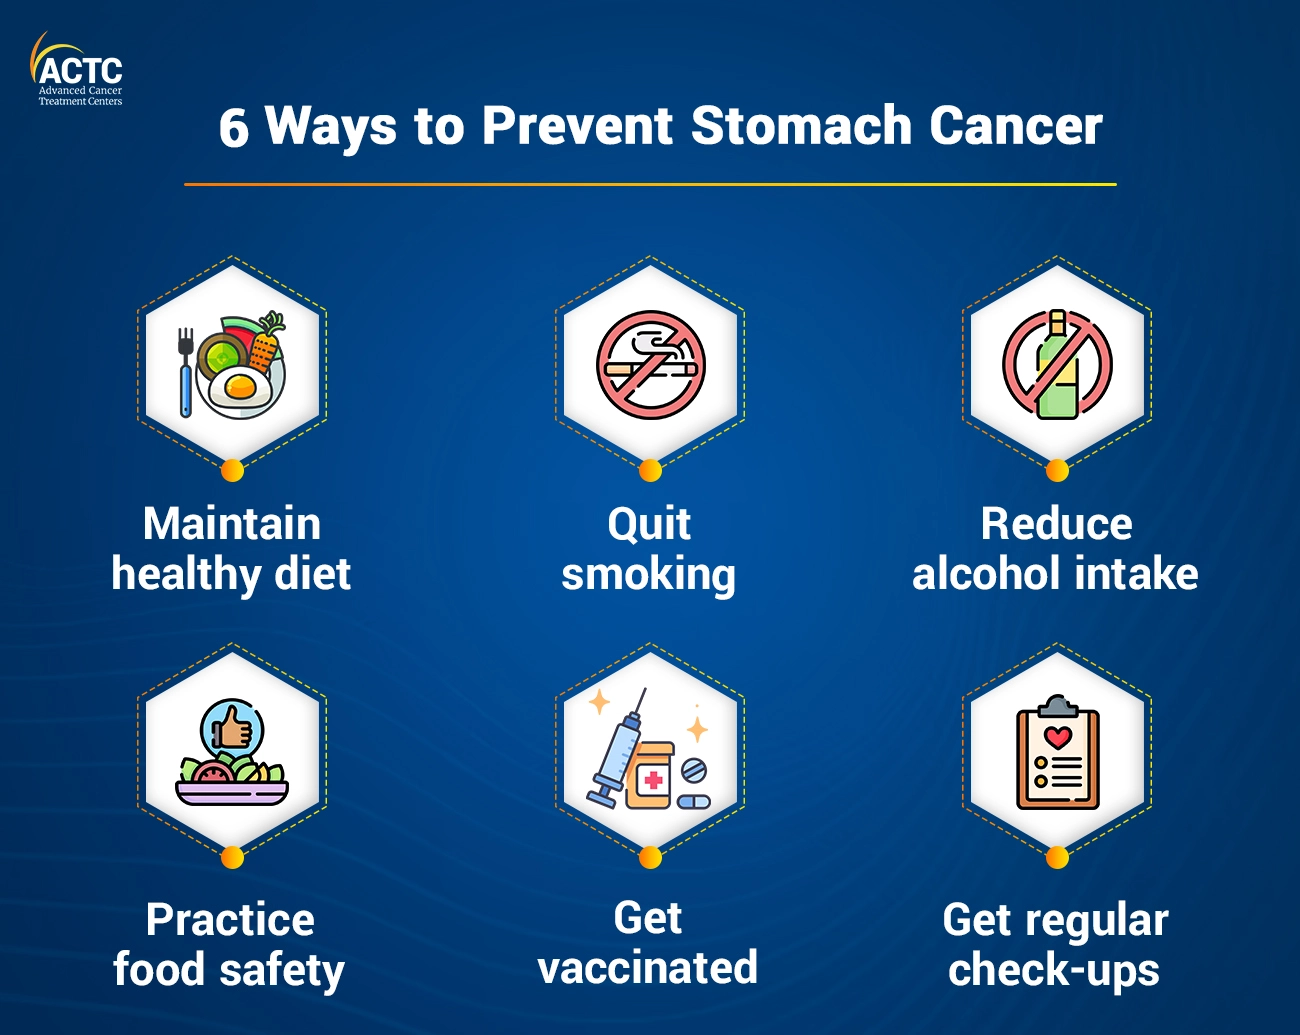 Preventive Ways to Reduce the Risk of Developing Stomach Cancer